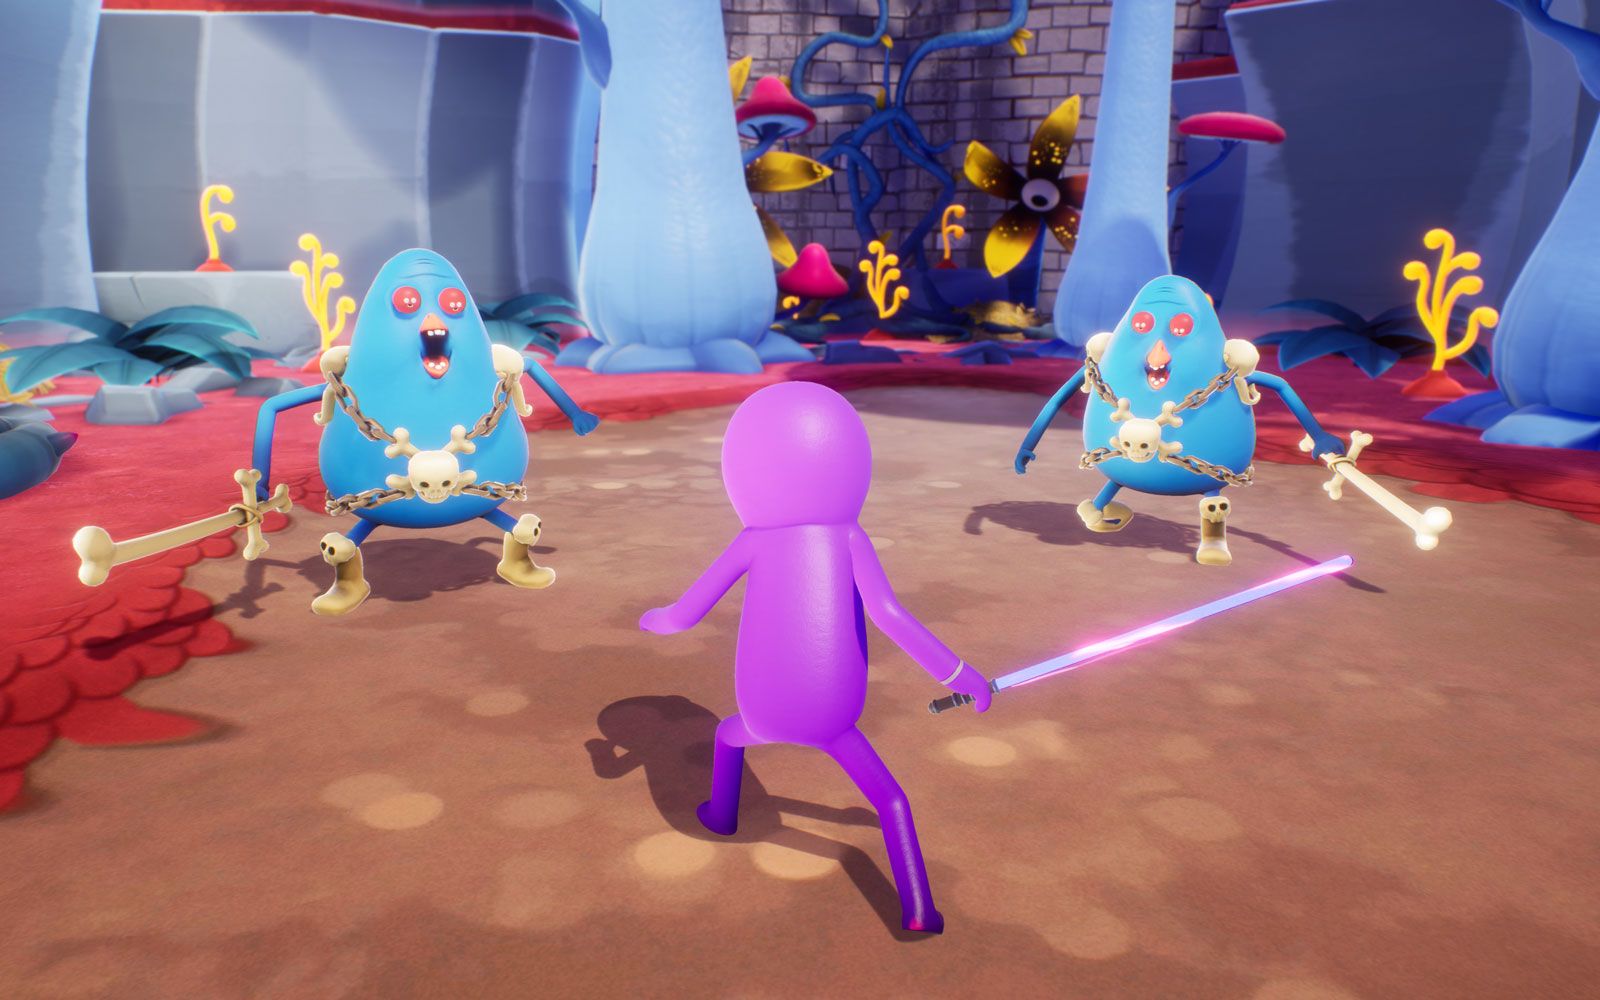 ‘Rick and Morty’ Co-Creator to Release Video Game, ‘Trover Saves the Universe’